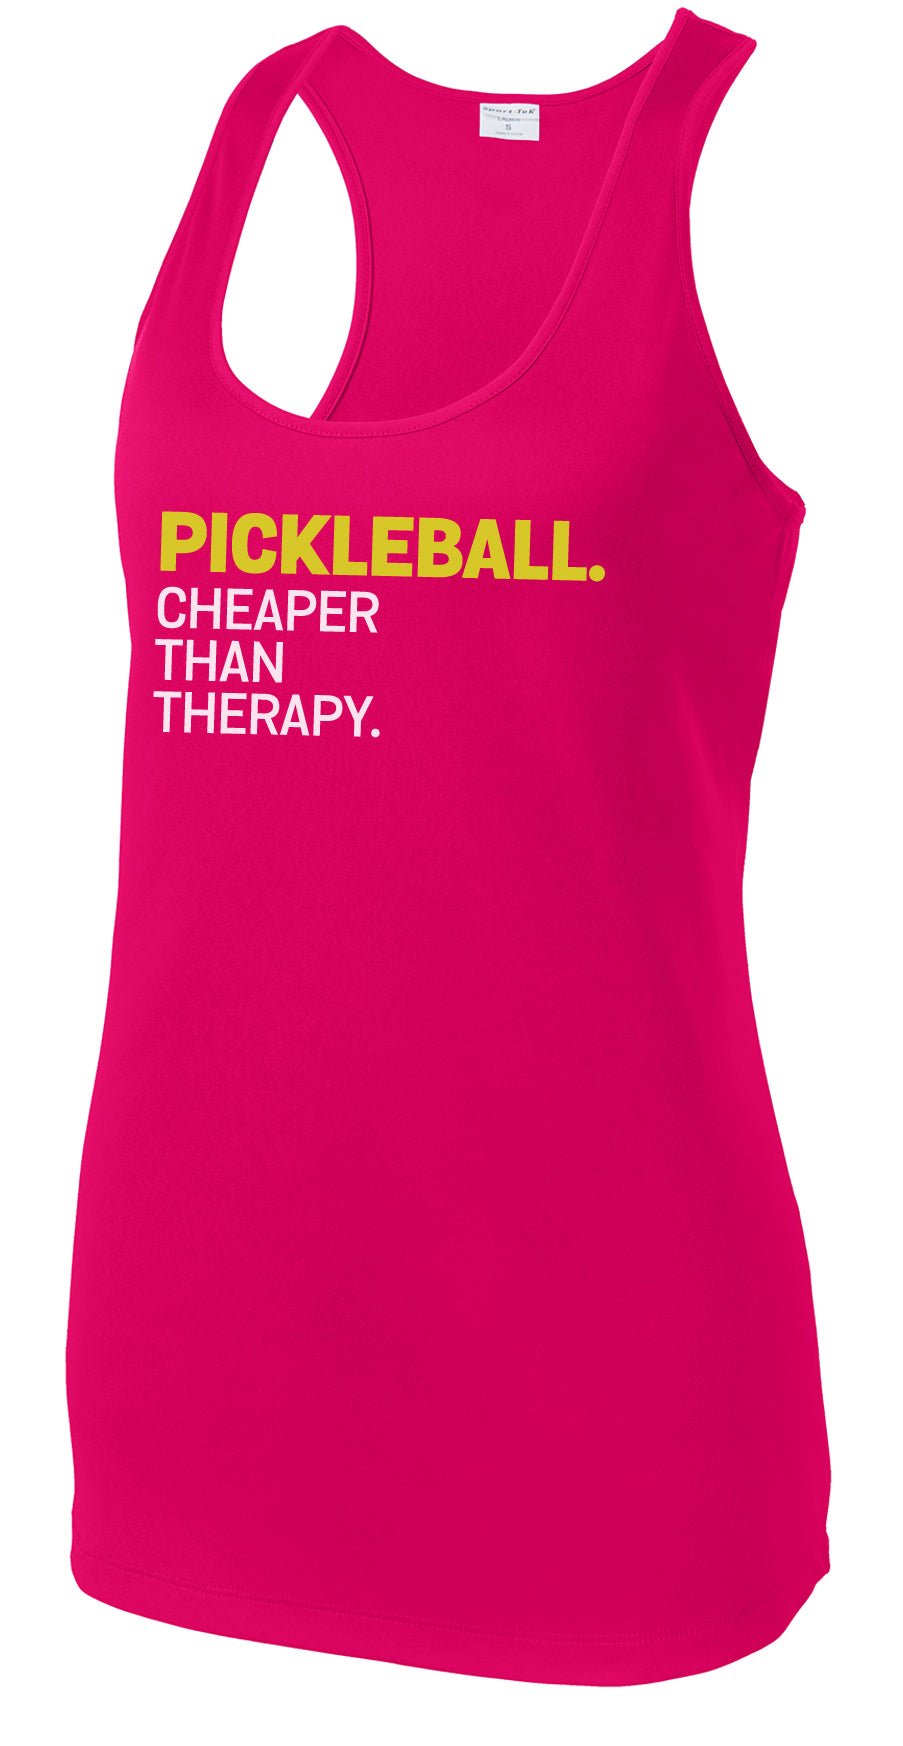 Pickleball. Cheaper Than Therapy. - Womens Performance Racerback Tank